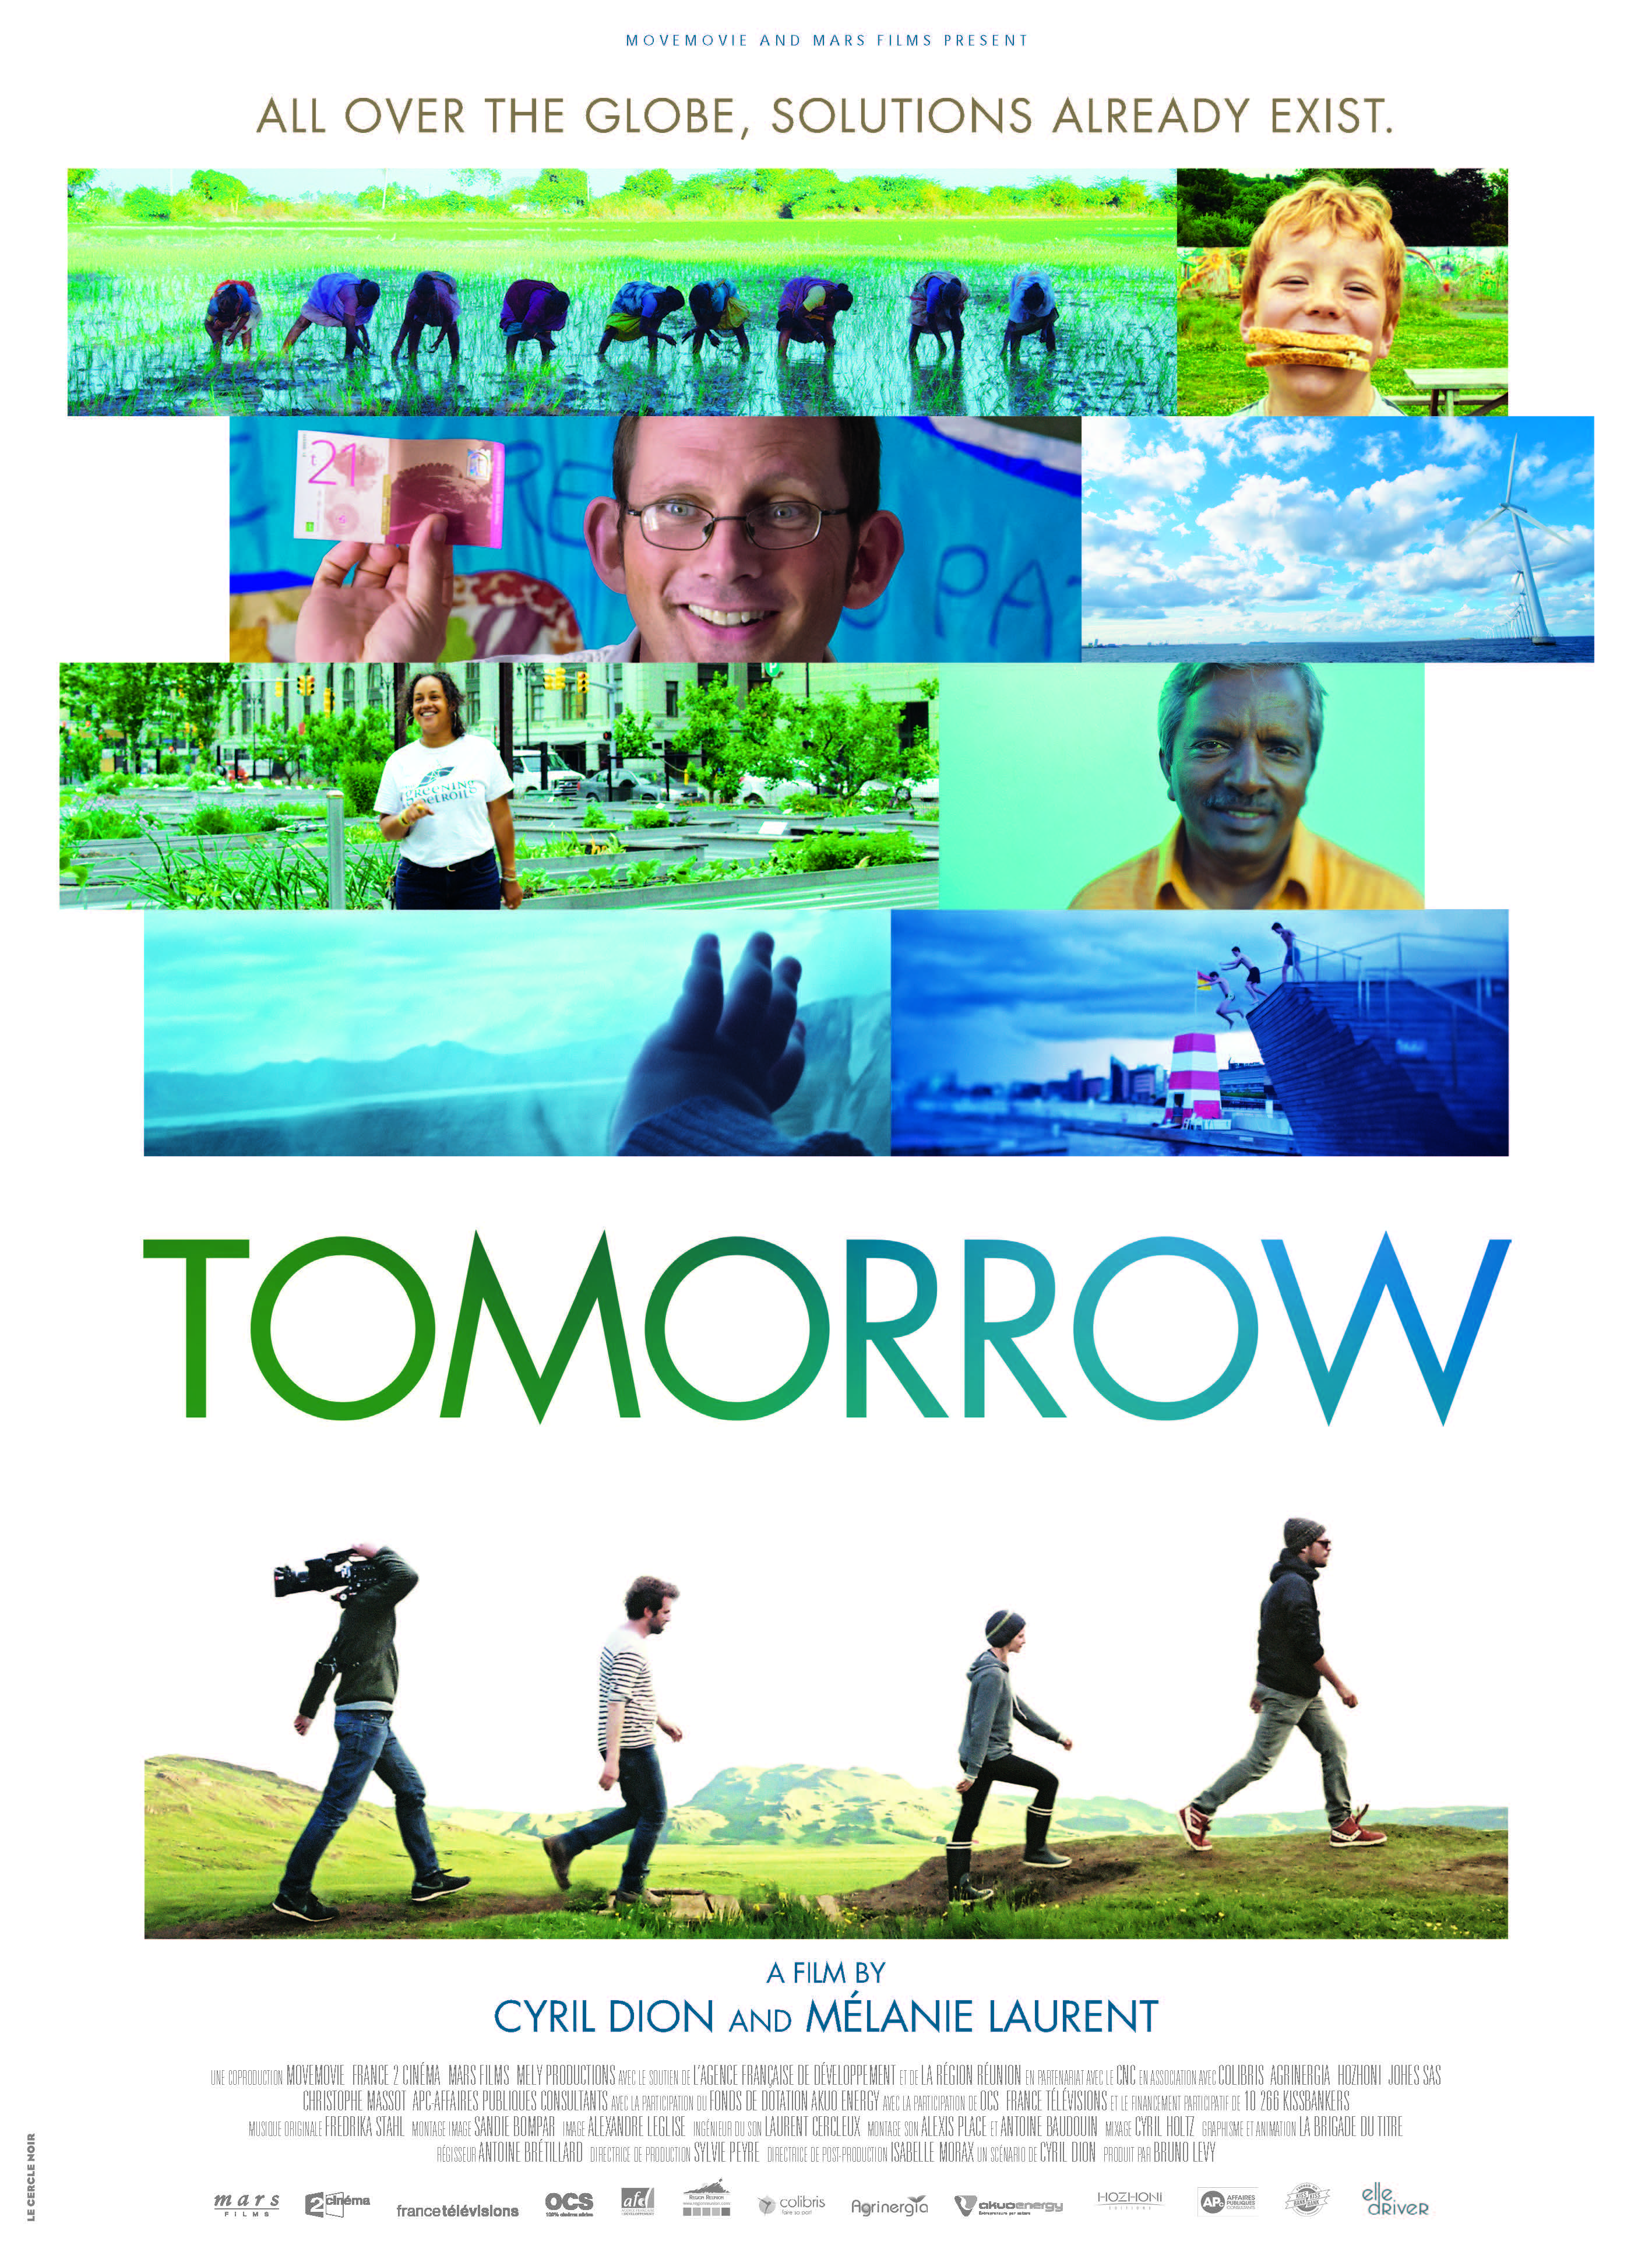 Fairbanks Showing of "Tomorrow," October 12th